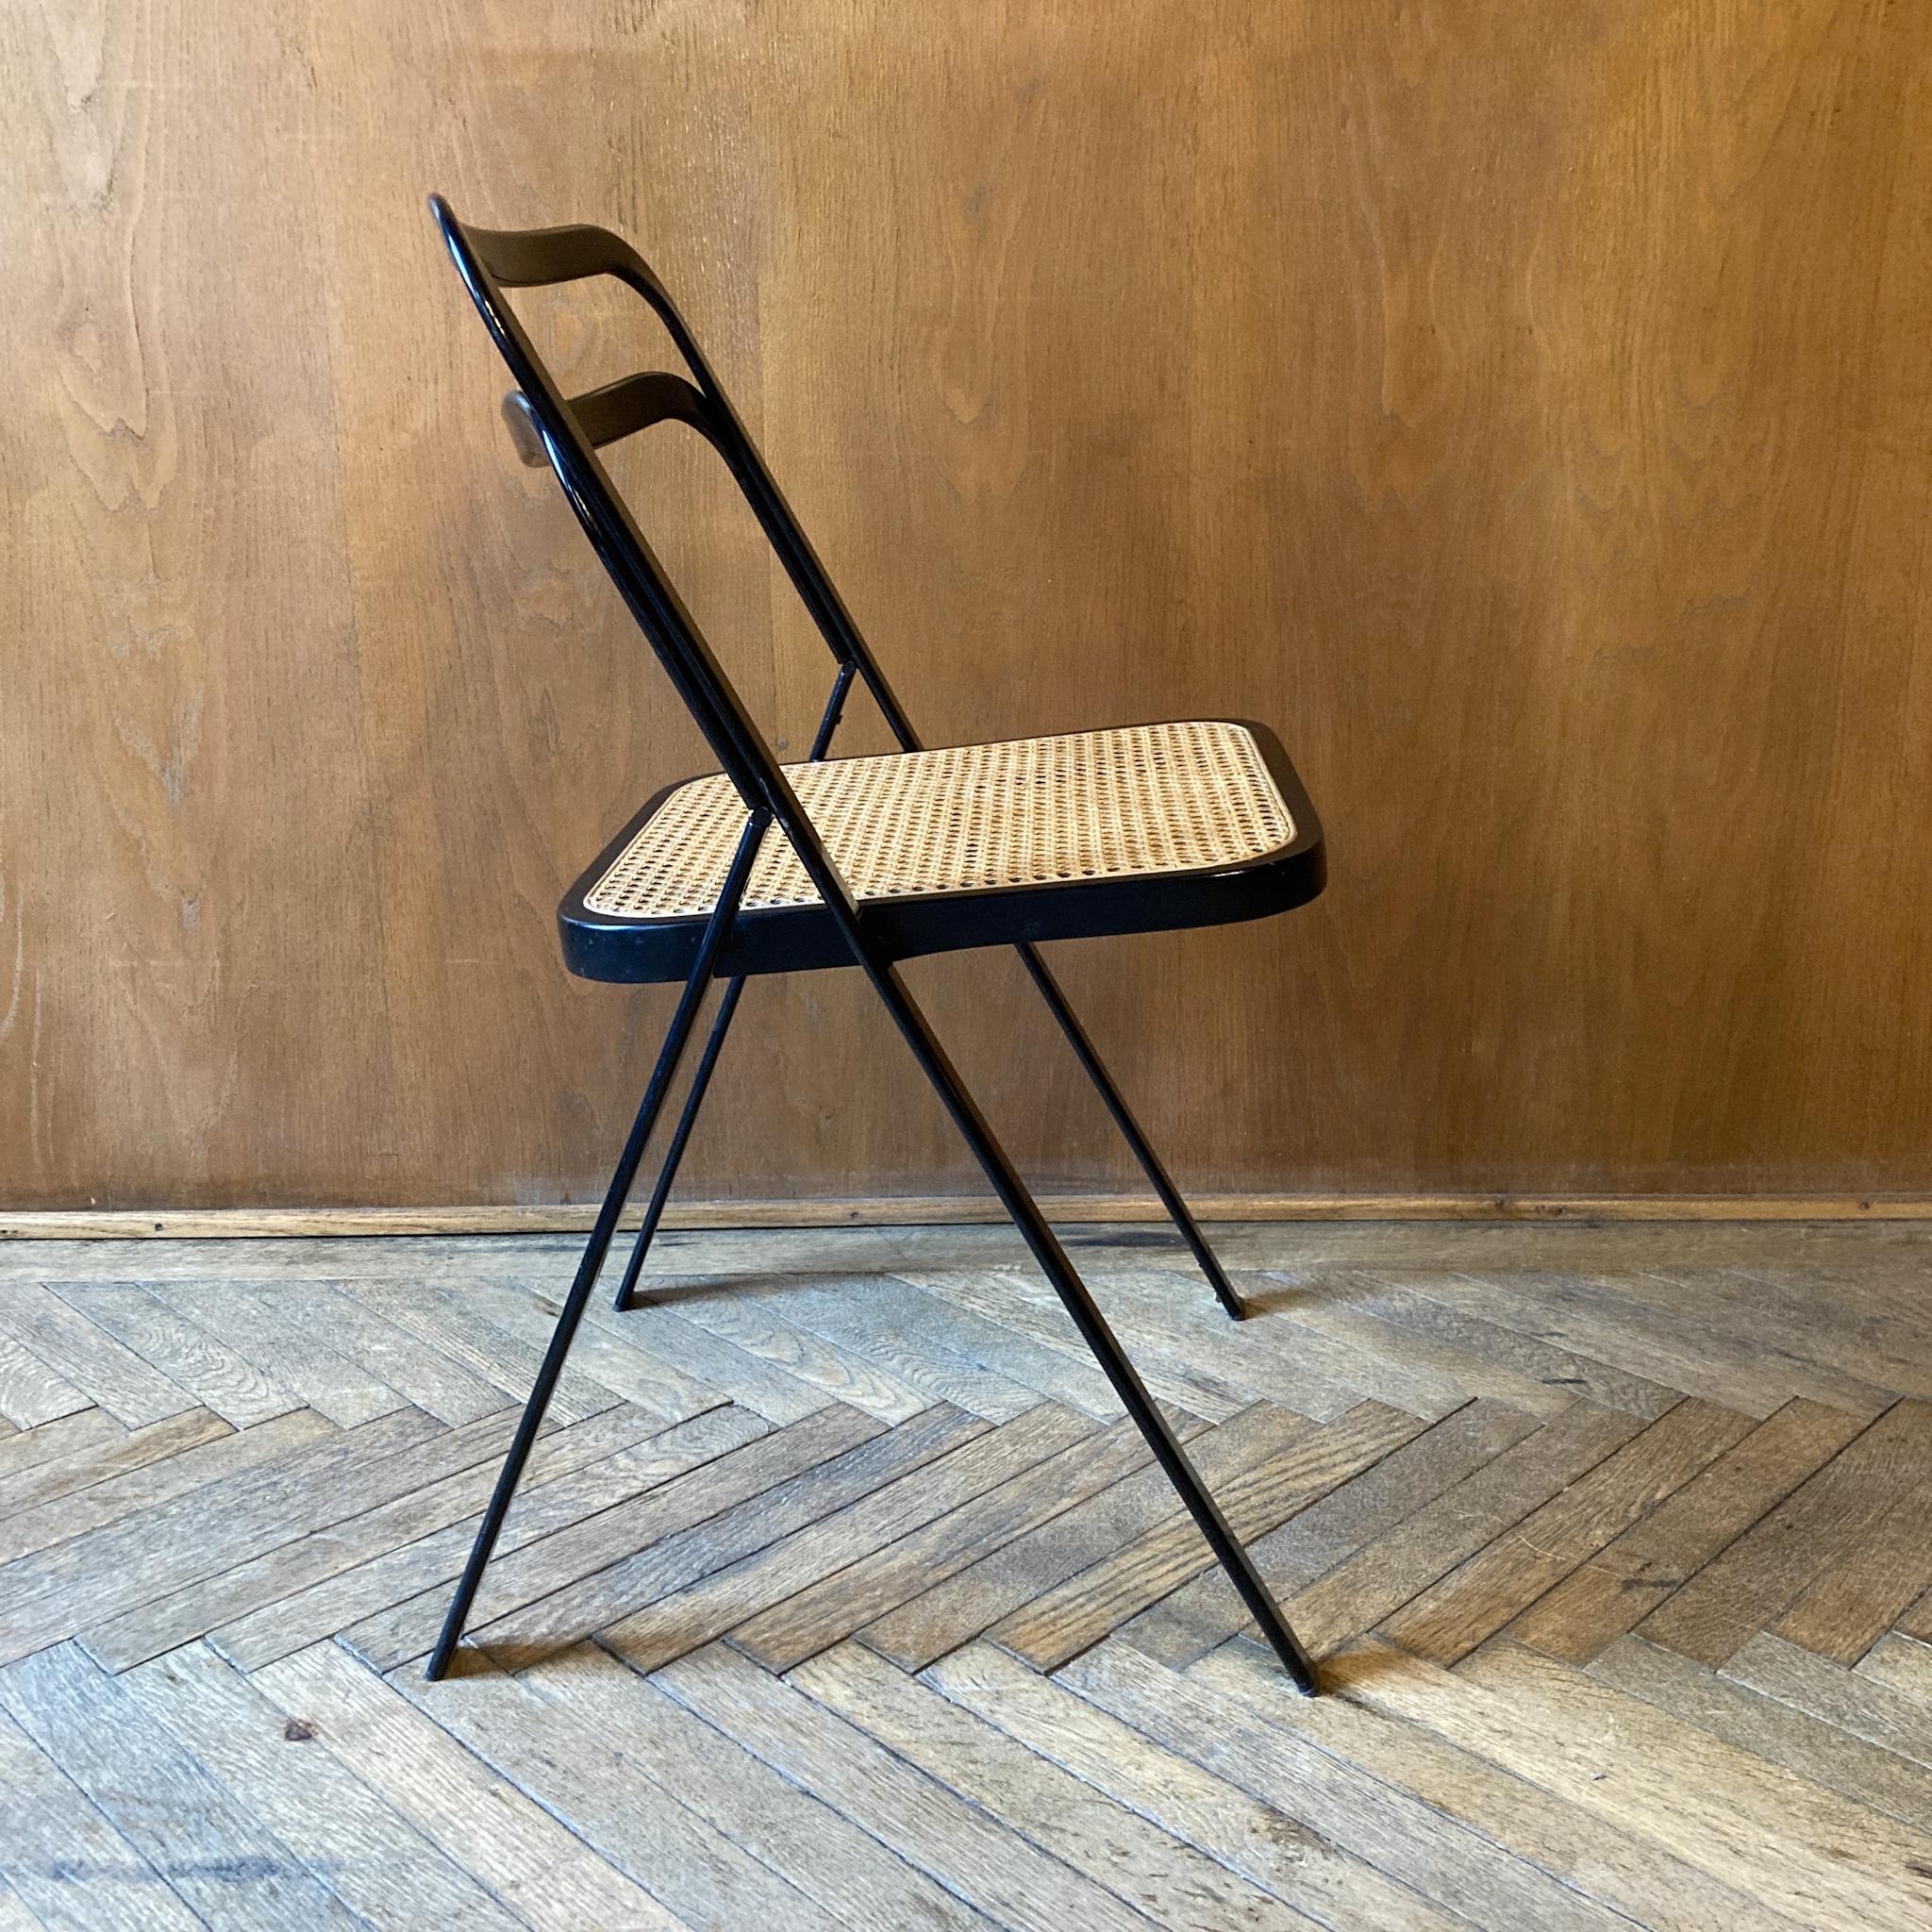 Late 20th Century Mid-Century Modern Folding Chairs Viennese Straw by G. Cattelan, Italy 1970s For Sale